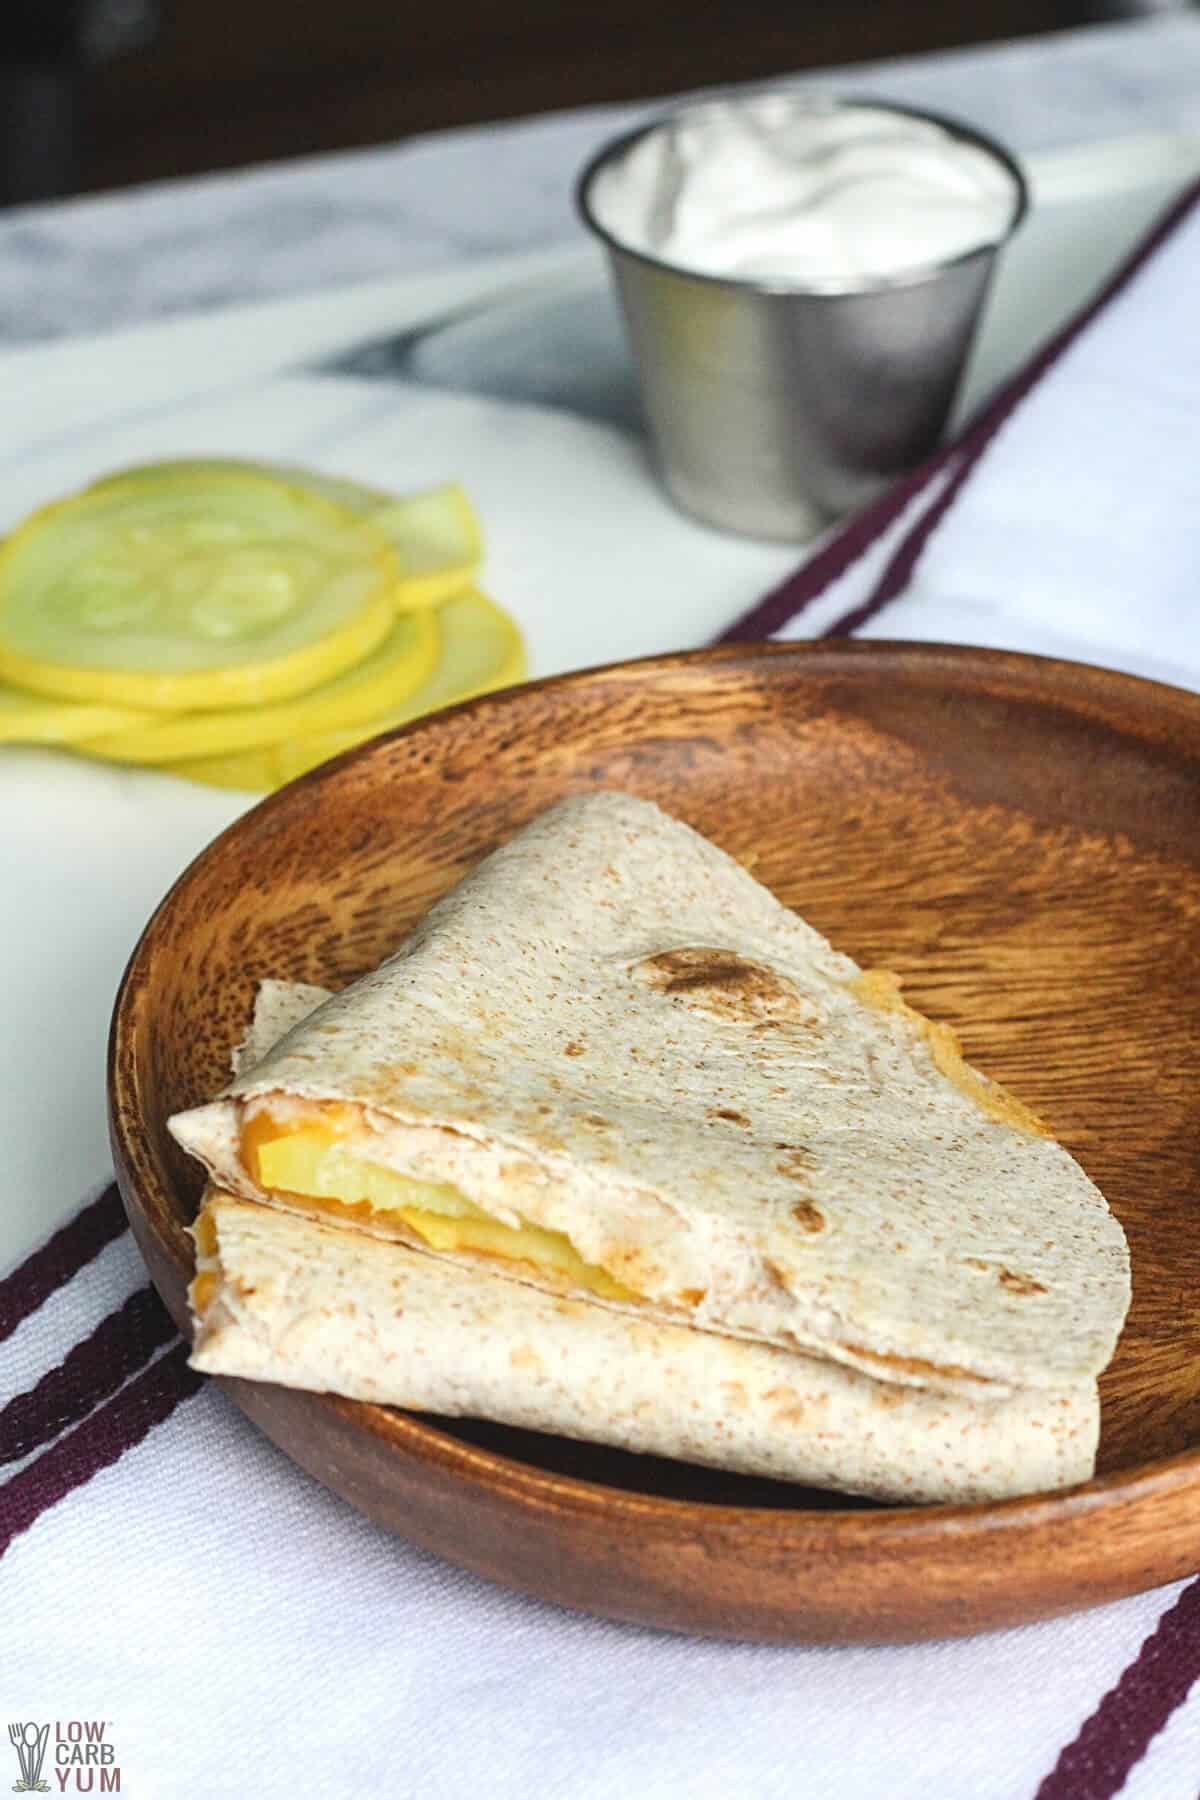 squash cheese quesadilla on wooden plate